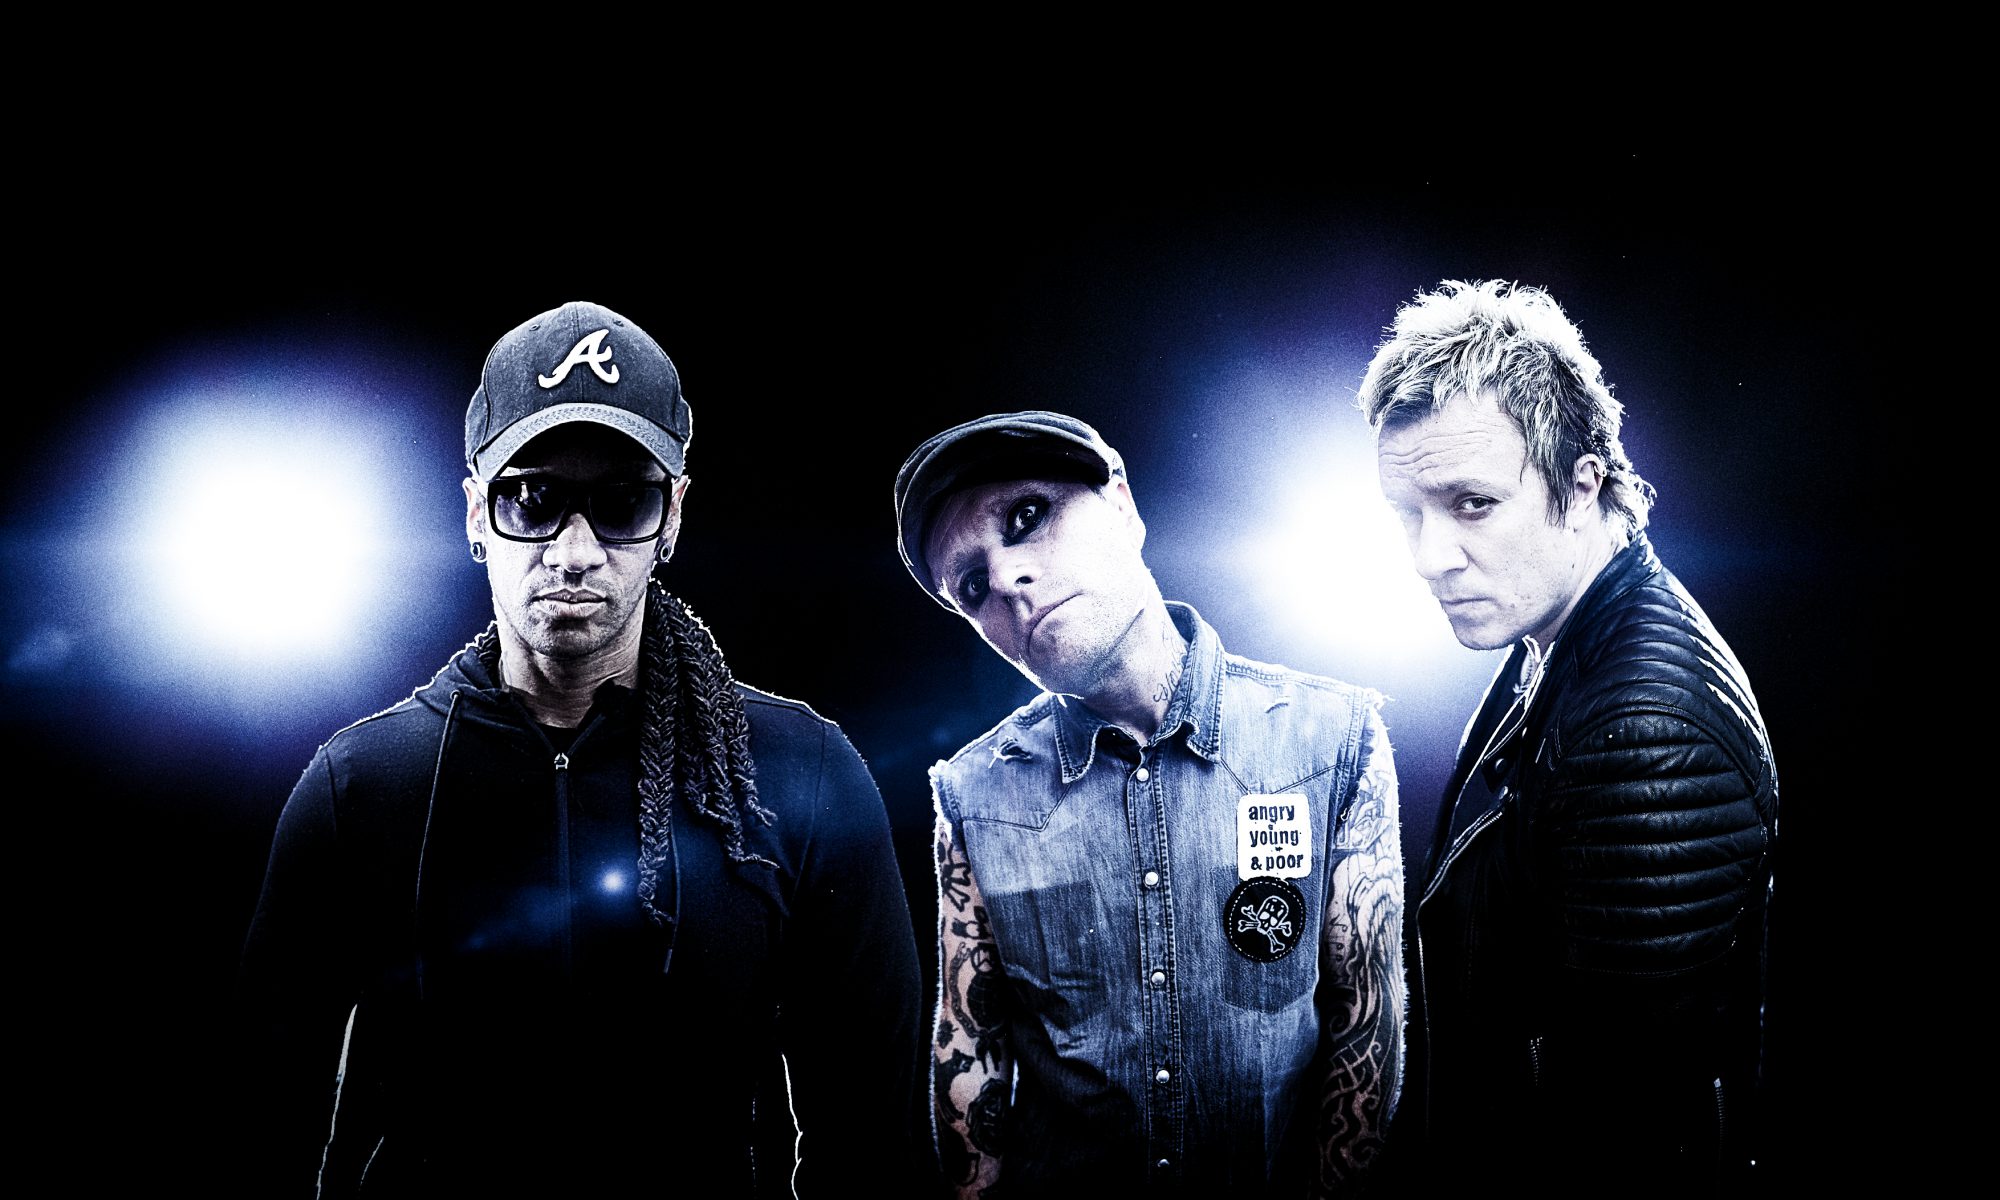 The Prodigy Tour Press Shot - Photography © Mike Van Cleven